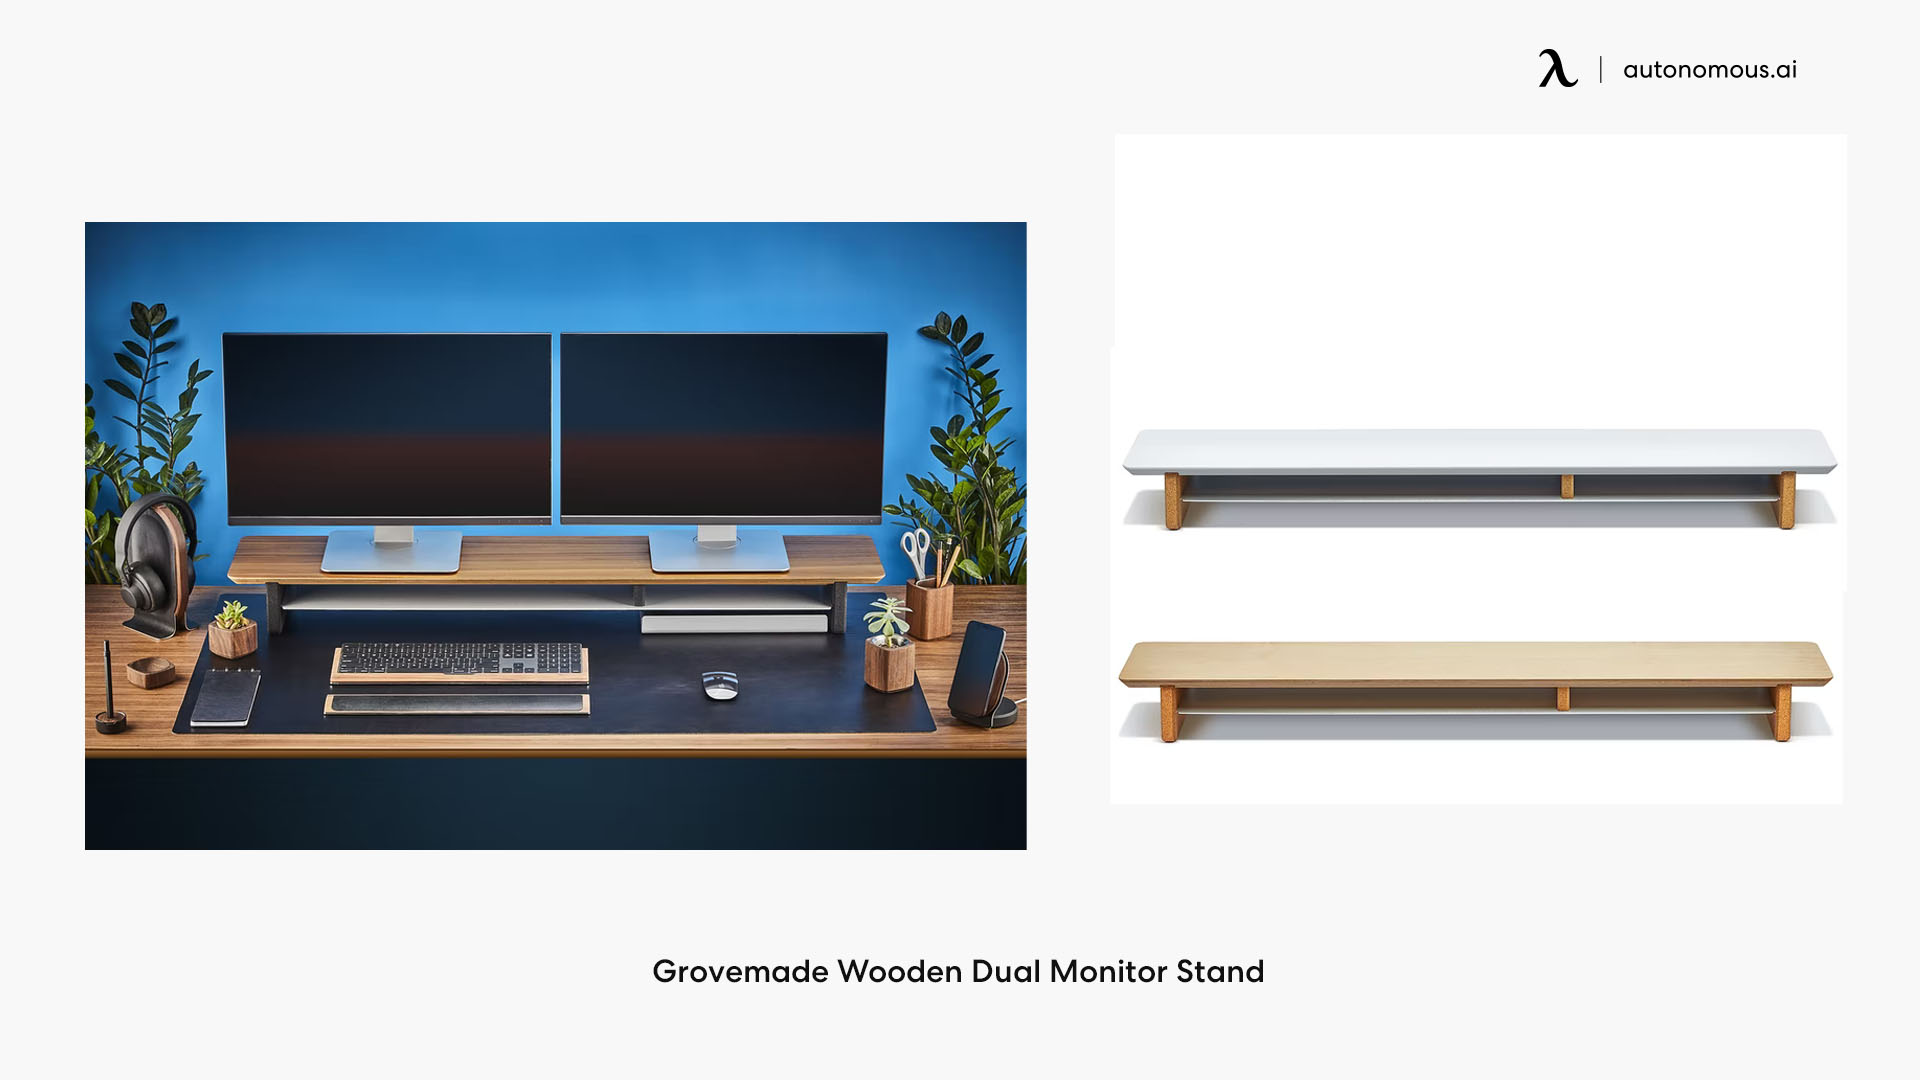 Grovemade Wooden Dual Monitor Stand by Governance